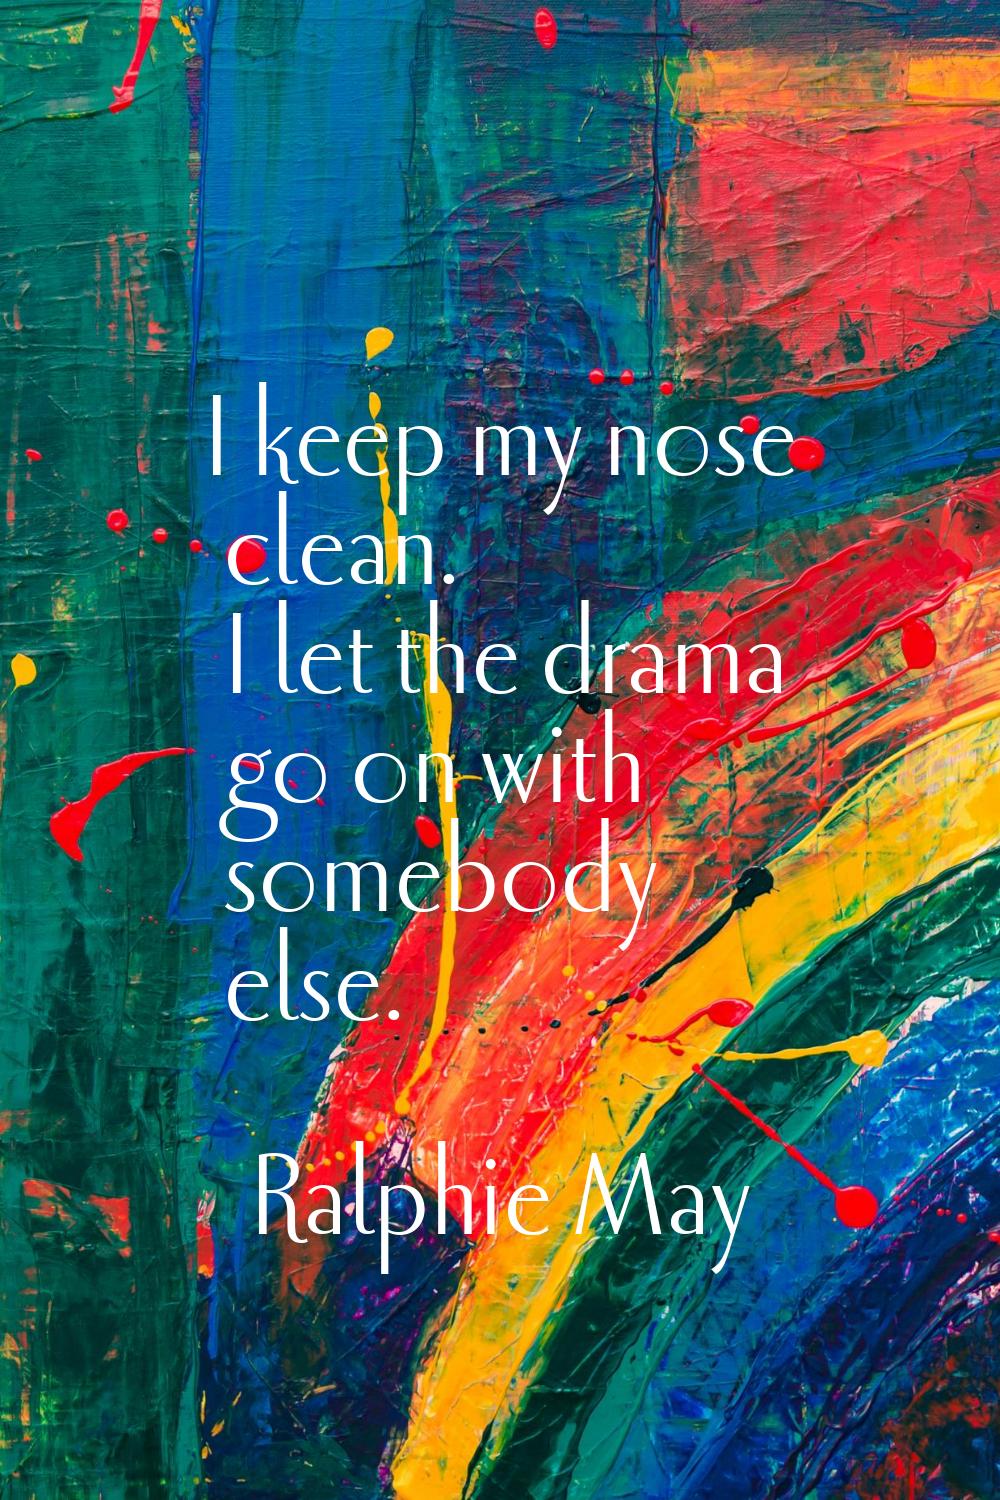 I keep my nose clean. I let the drama go on with somebody else.